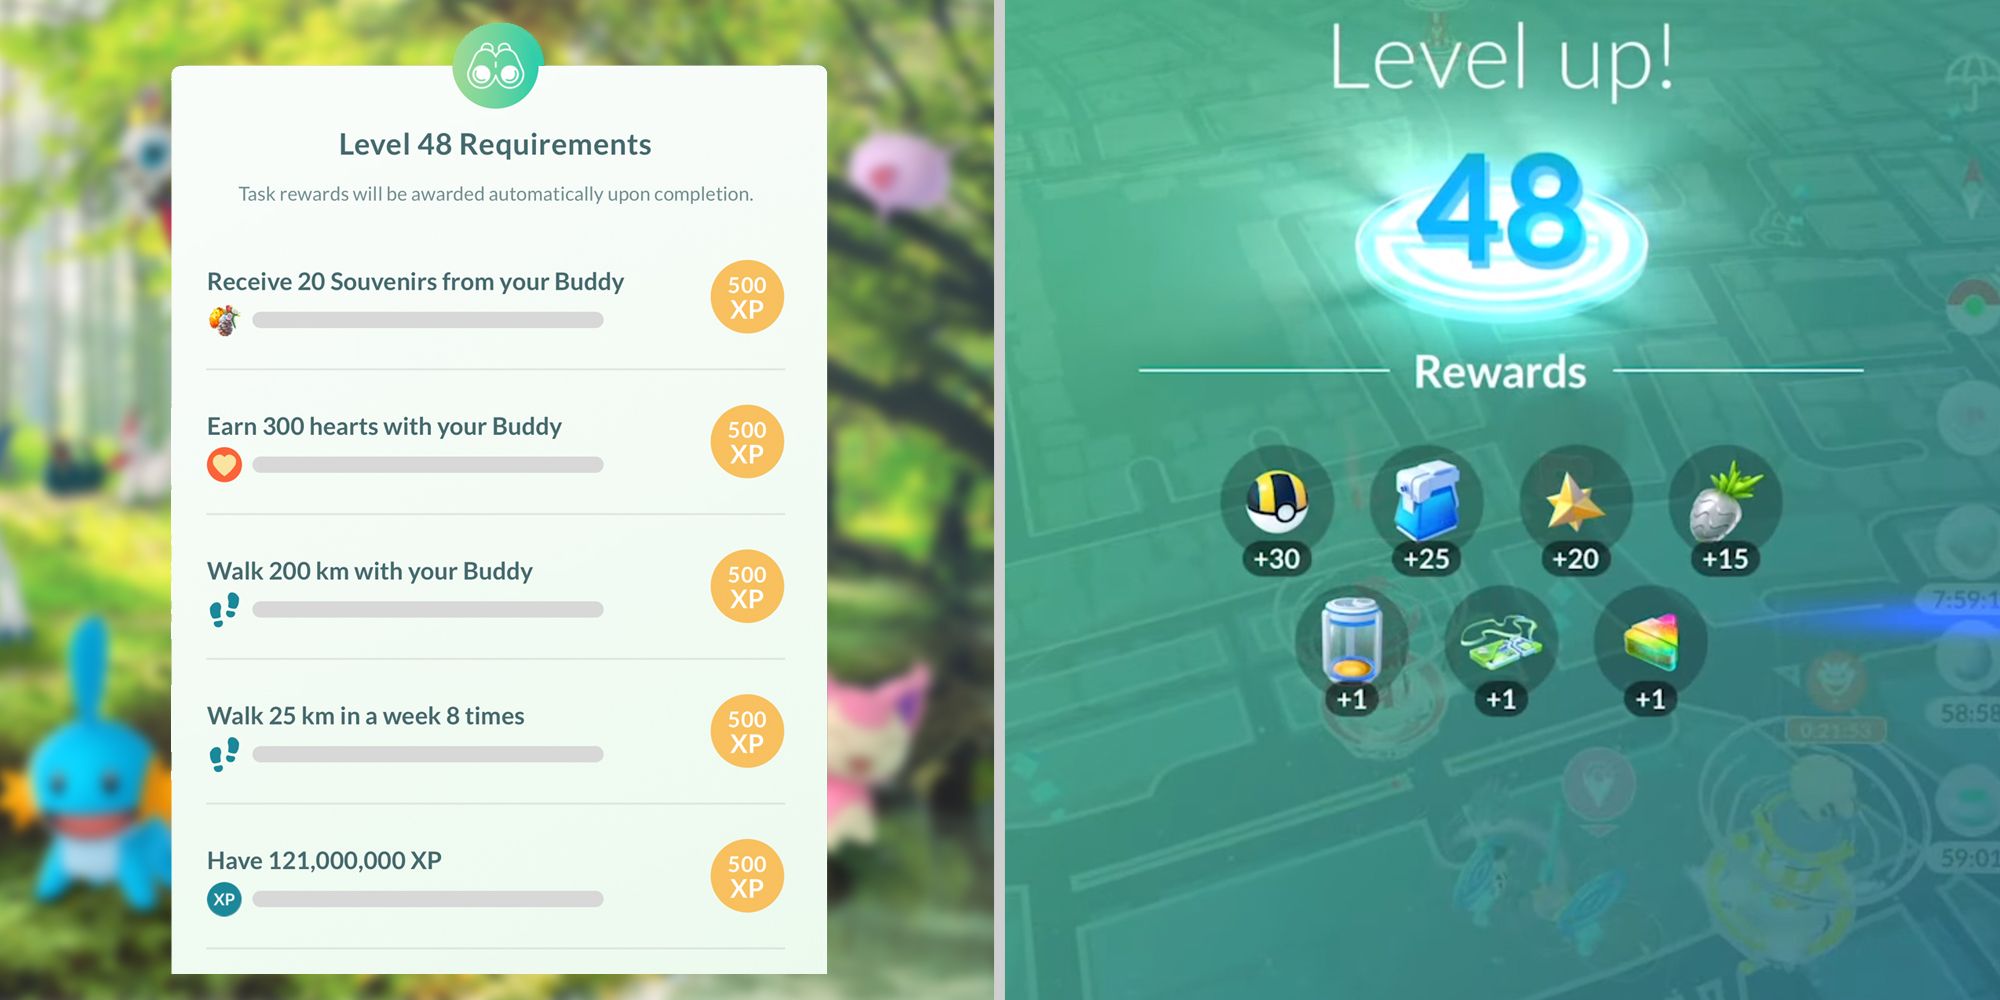 Requirements and rewards for level 48 in Pokemon Go